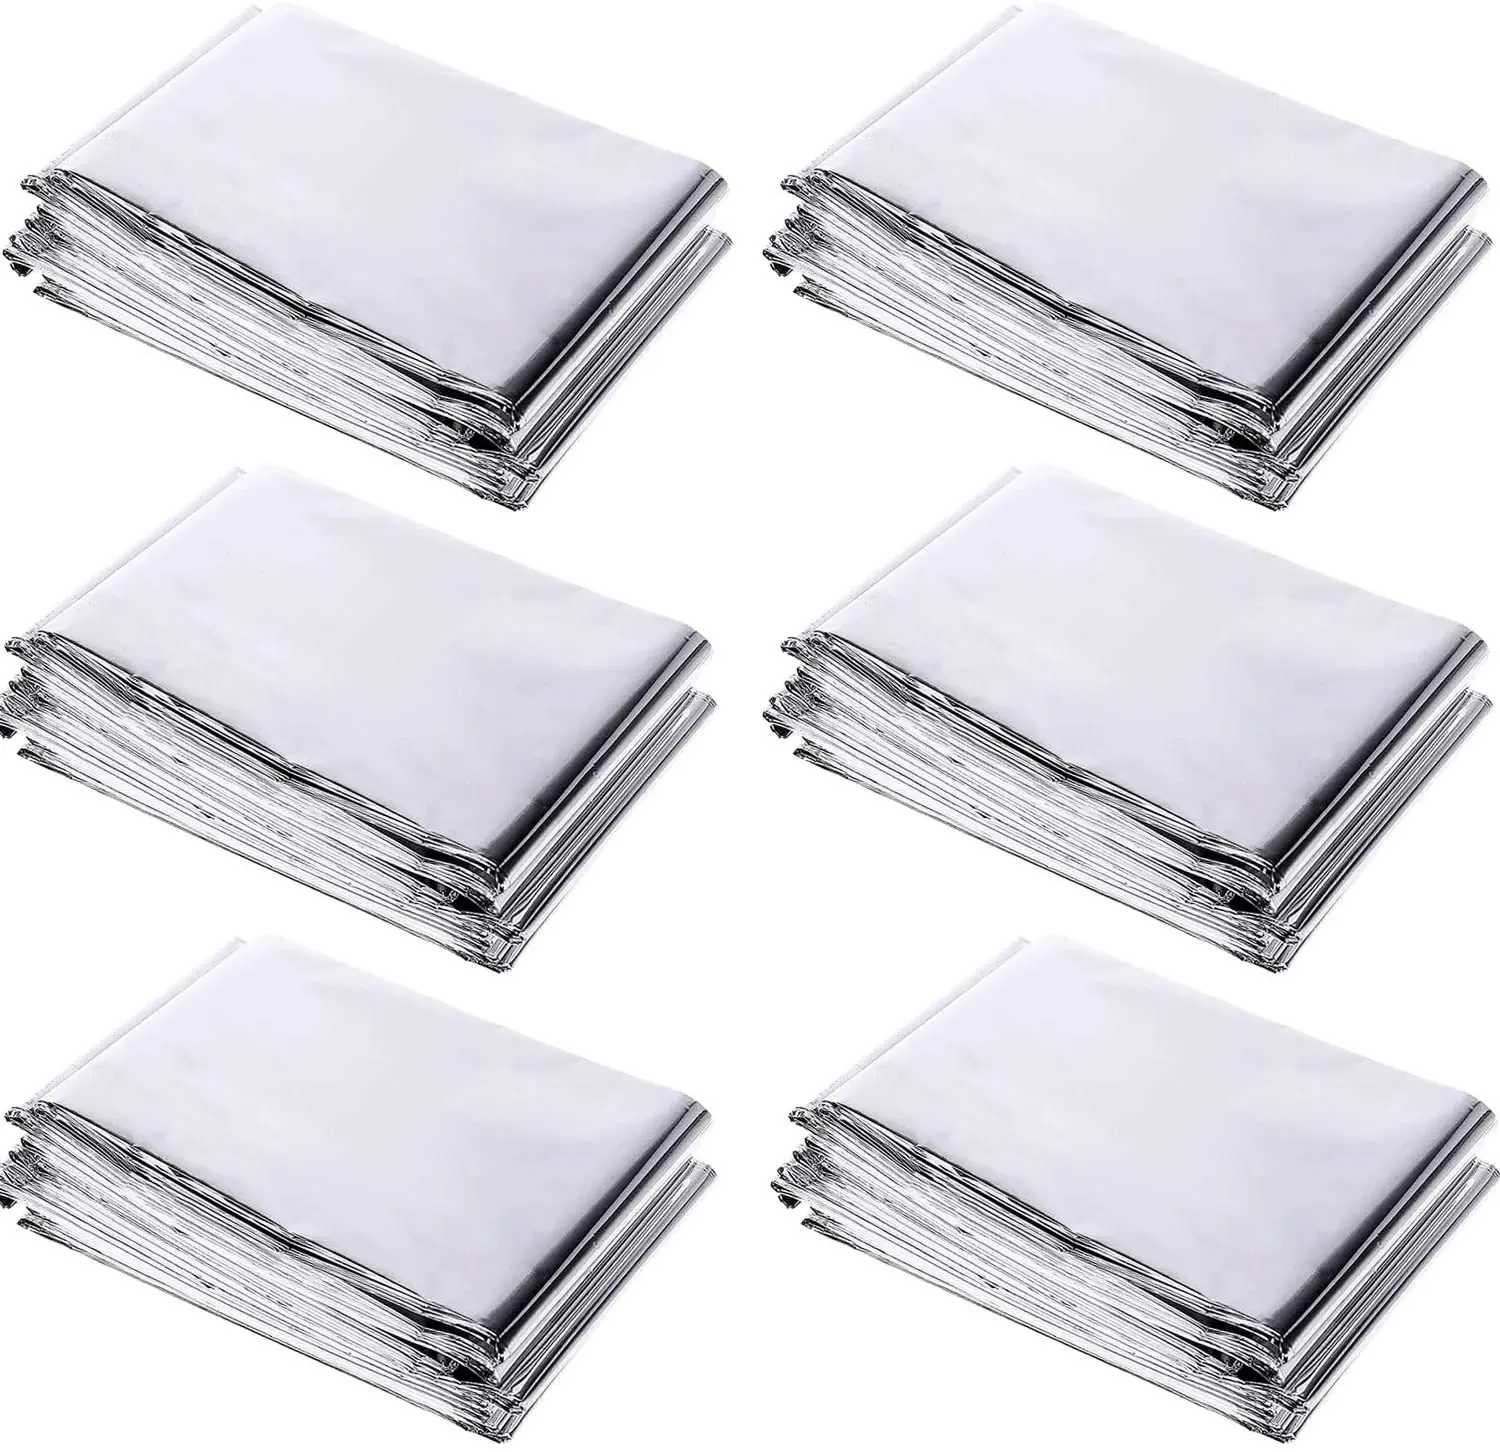 

2Pcs/ 6Pcs Silver Highly Reflective Mylar Films 210x130cm for Grow Tent Room Garden Greenhouse Farming Increase Plant Growth